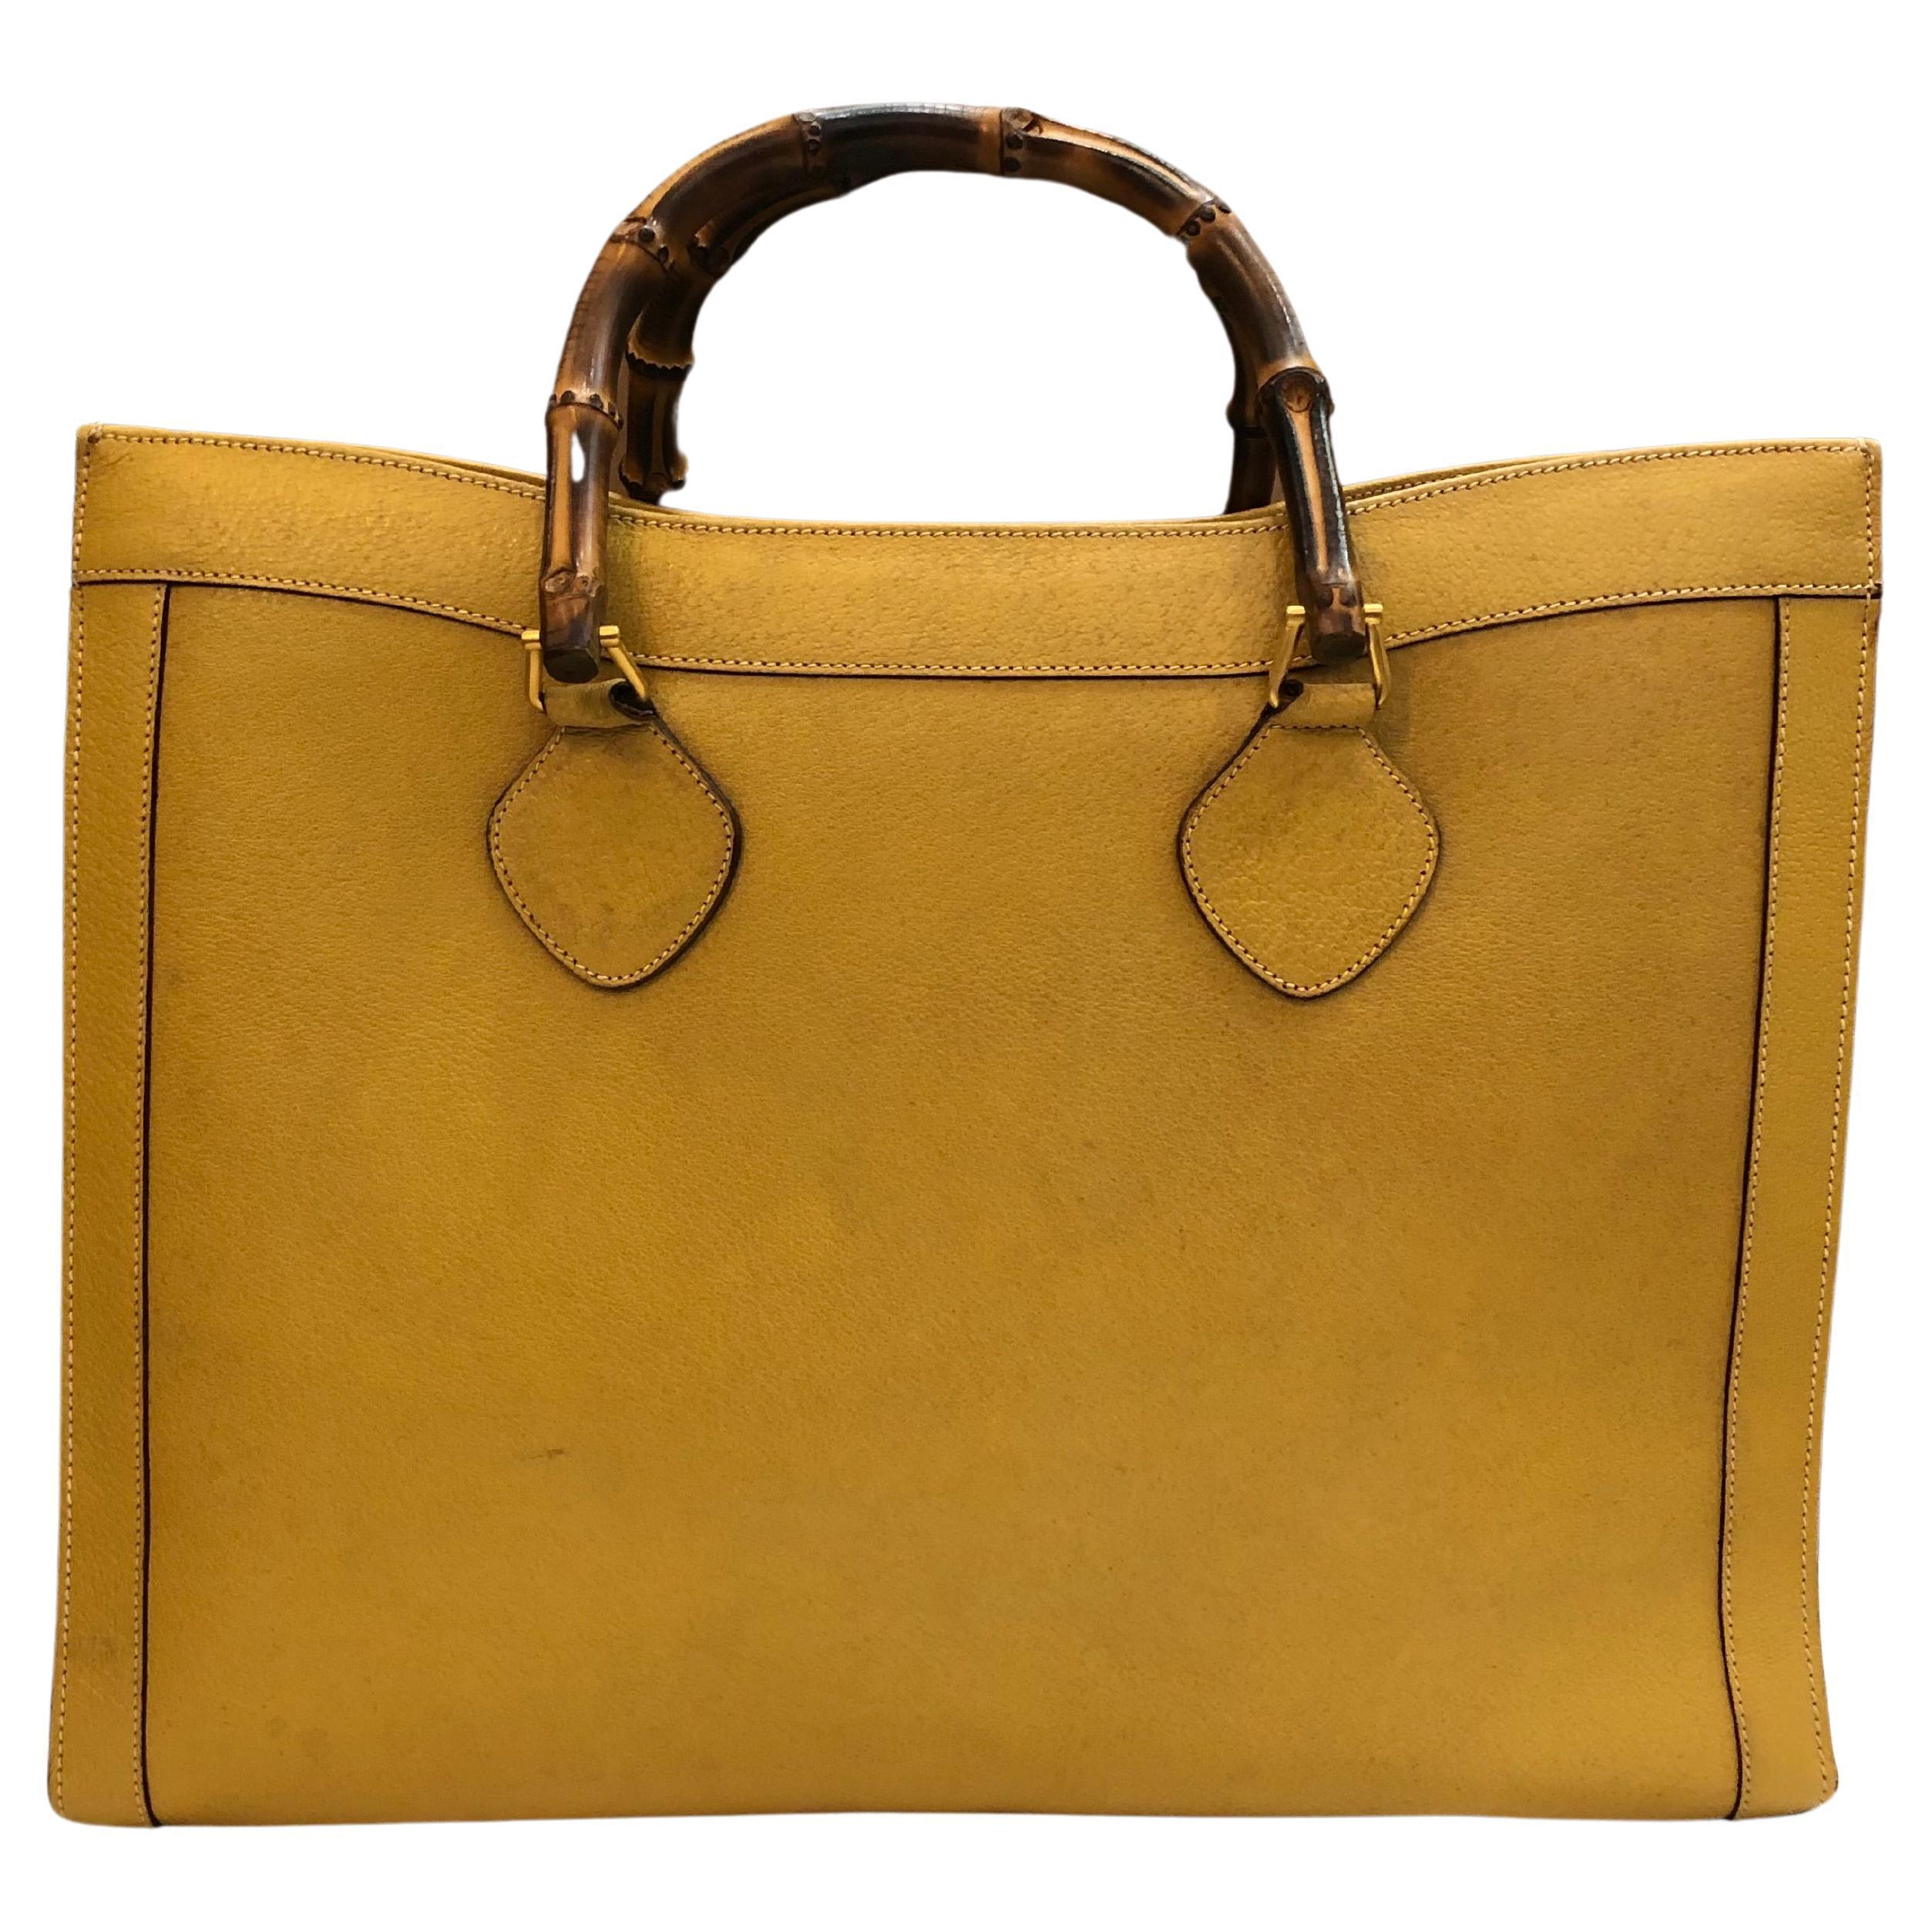 This large vintage Gucci Diana bamboo tote bag is crafted of pigskin leather in yellow featuring matte gold-toned hardware and sturdy bamboo handles. Wide top opens to one single spacious compartment with original beige leather interior featuring a